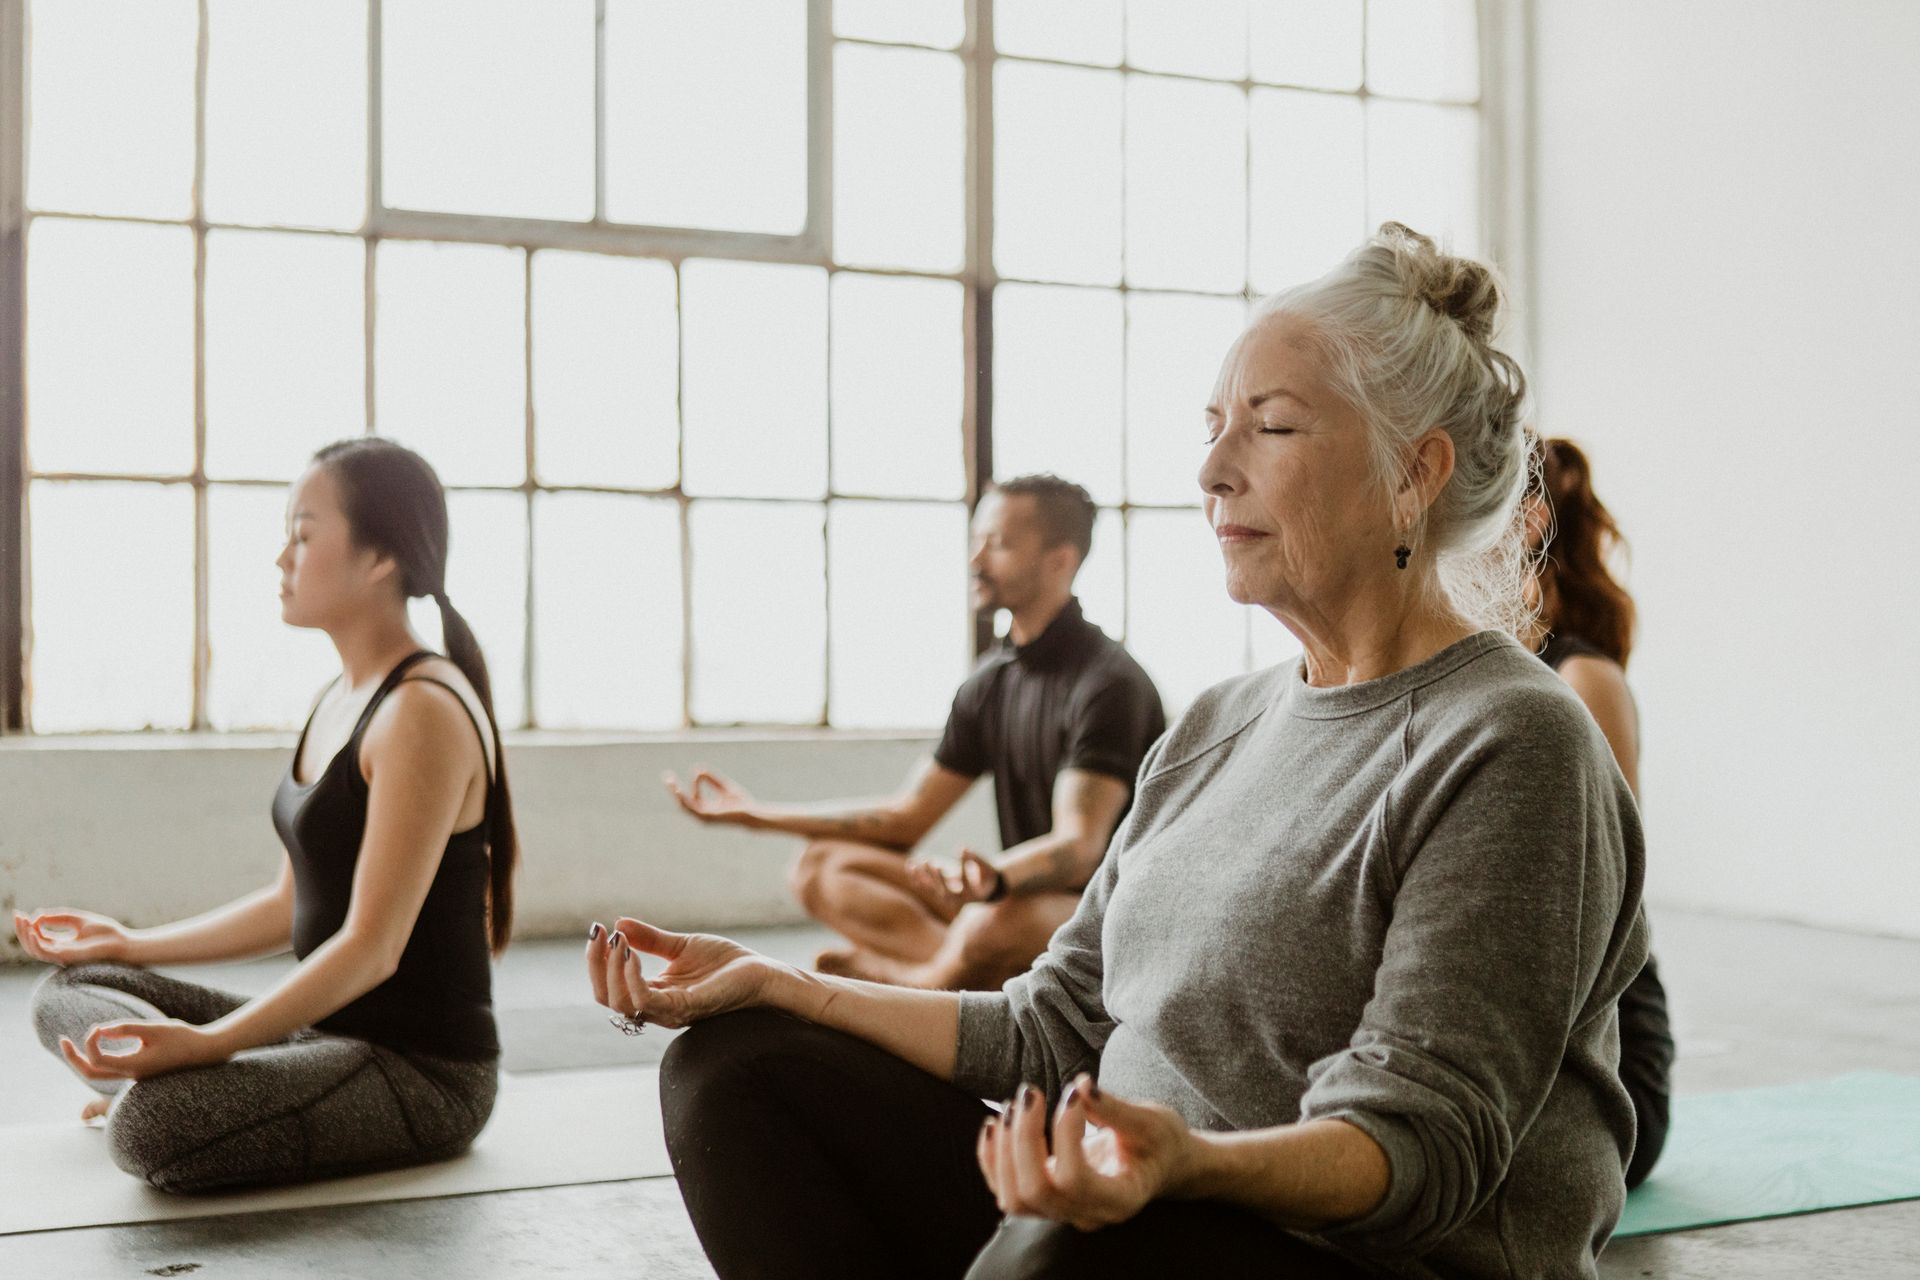  People sitting and meditating during a yoga class